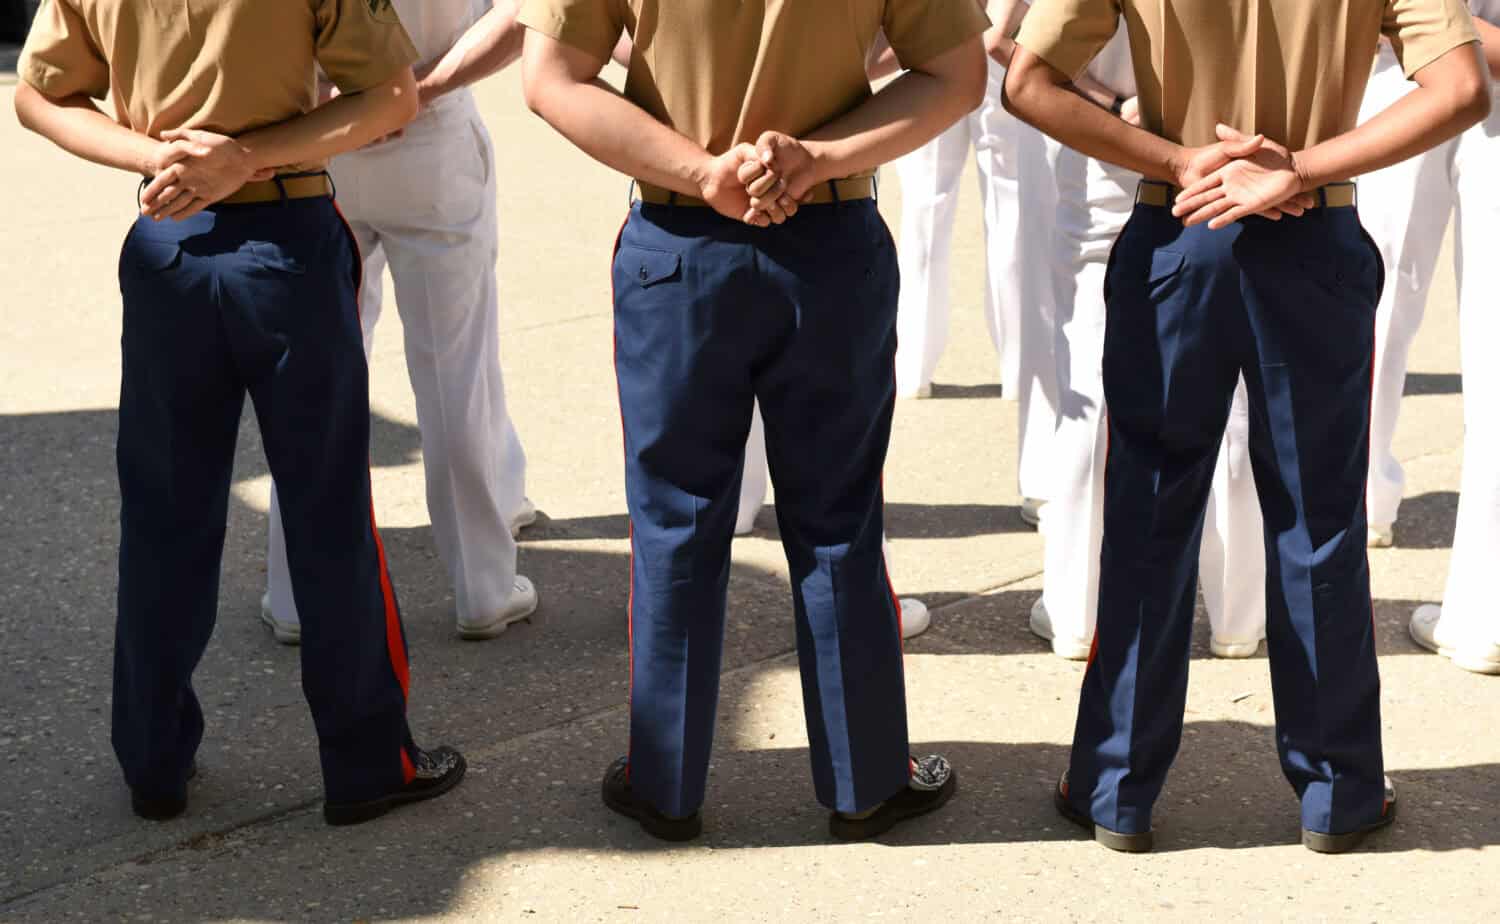 US Navy sailors from the back. US Navy army.